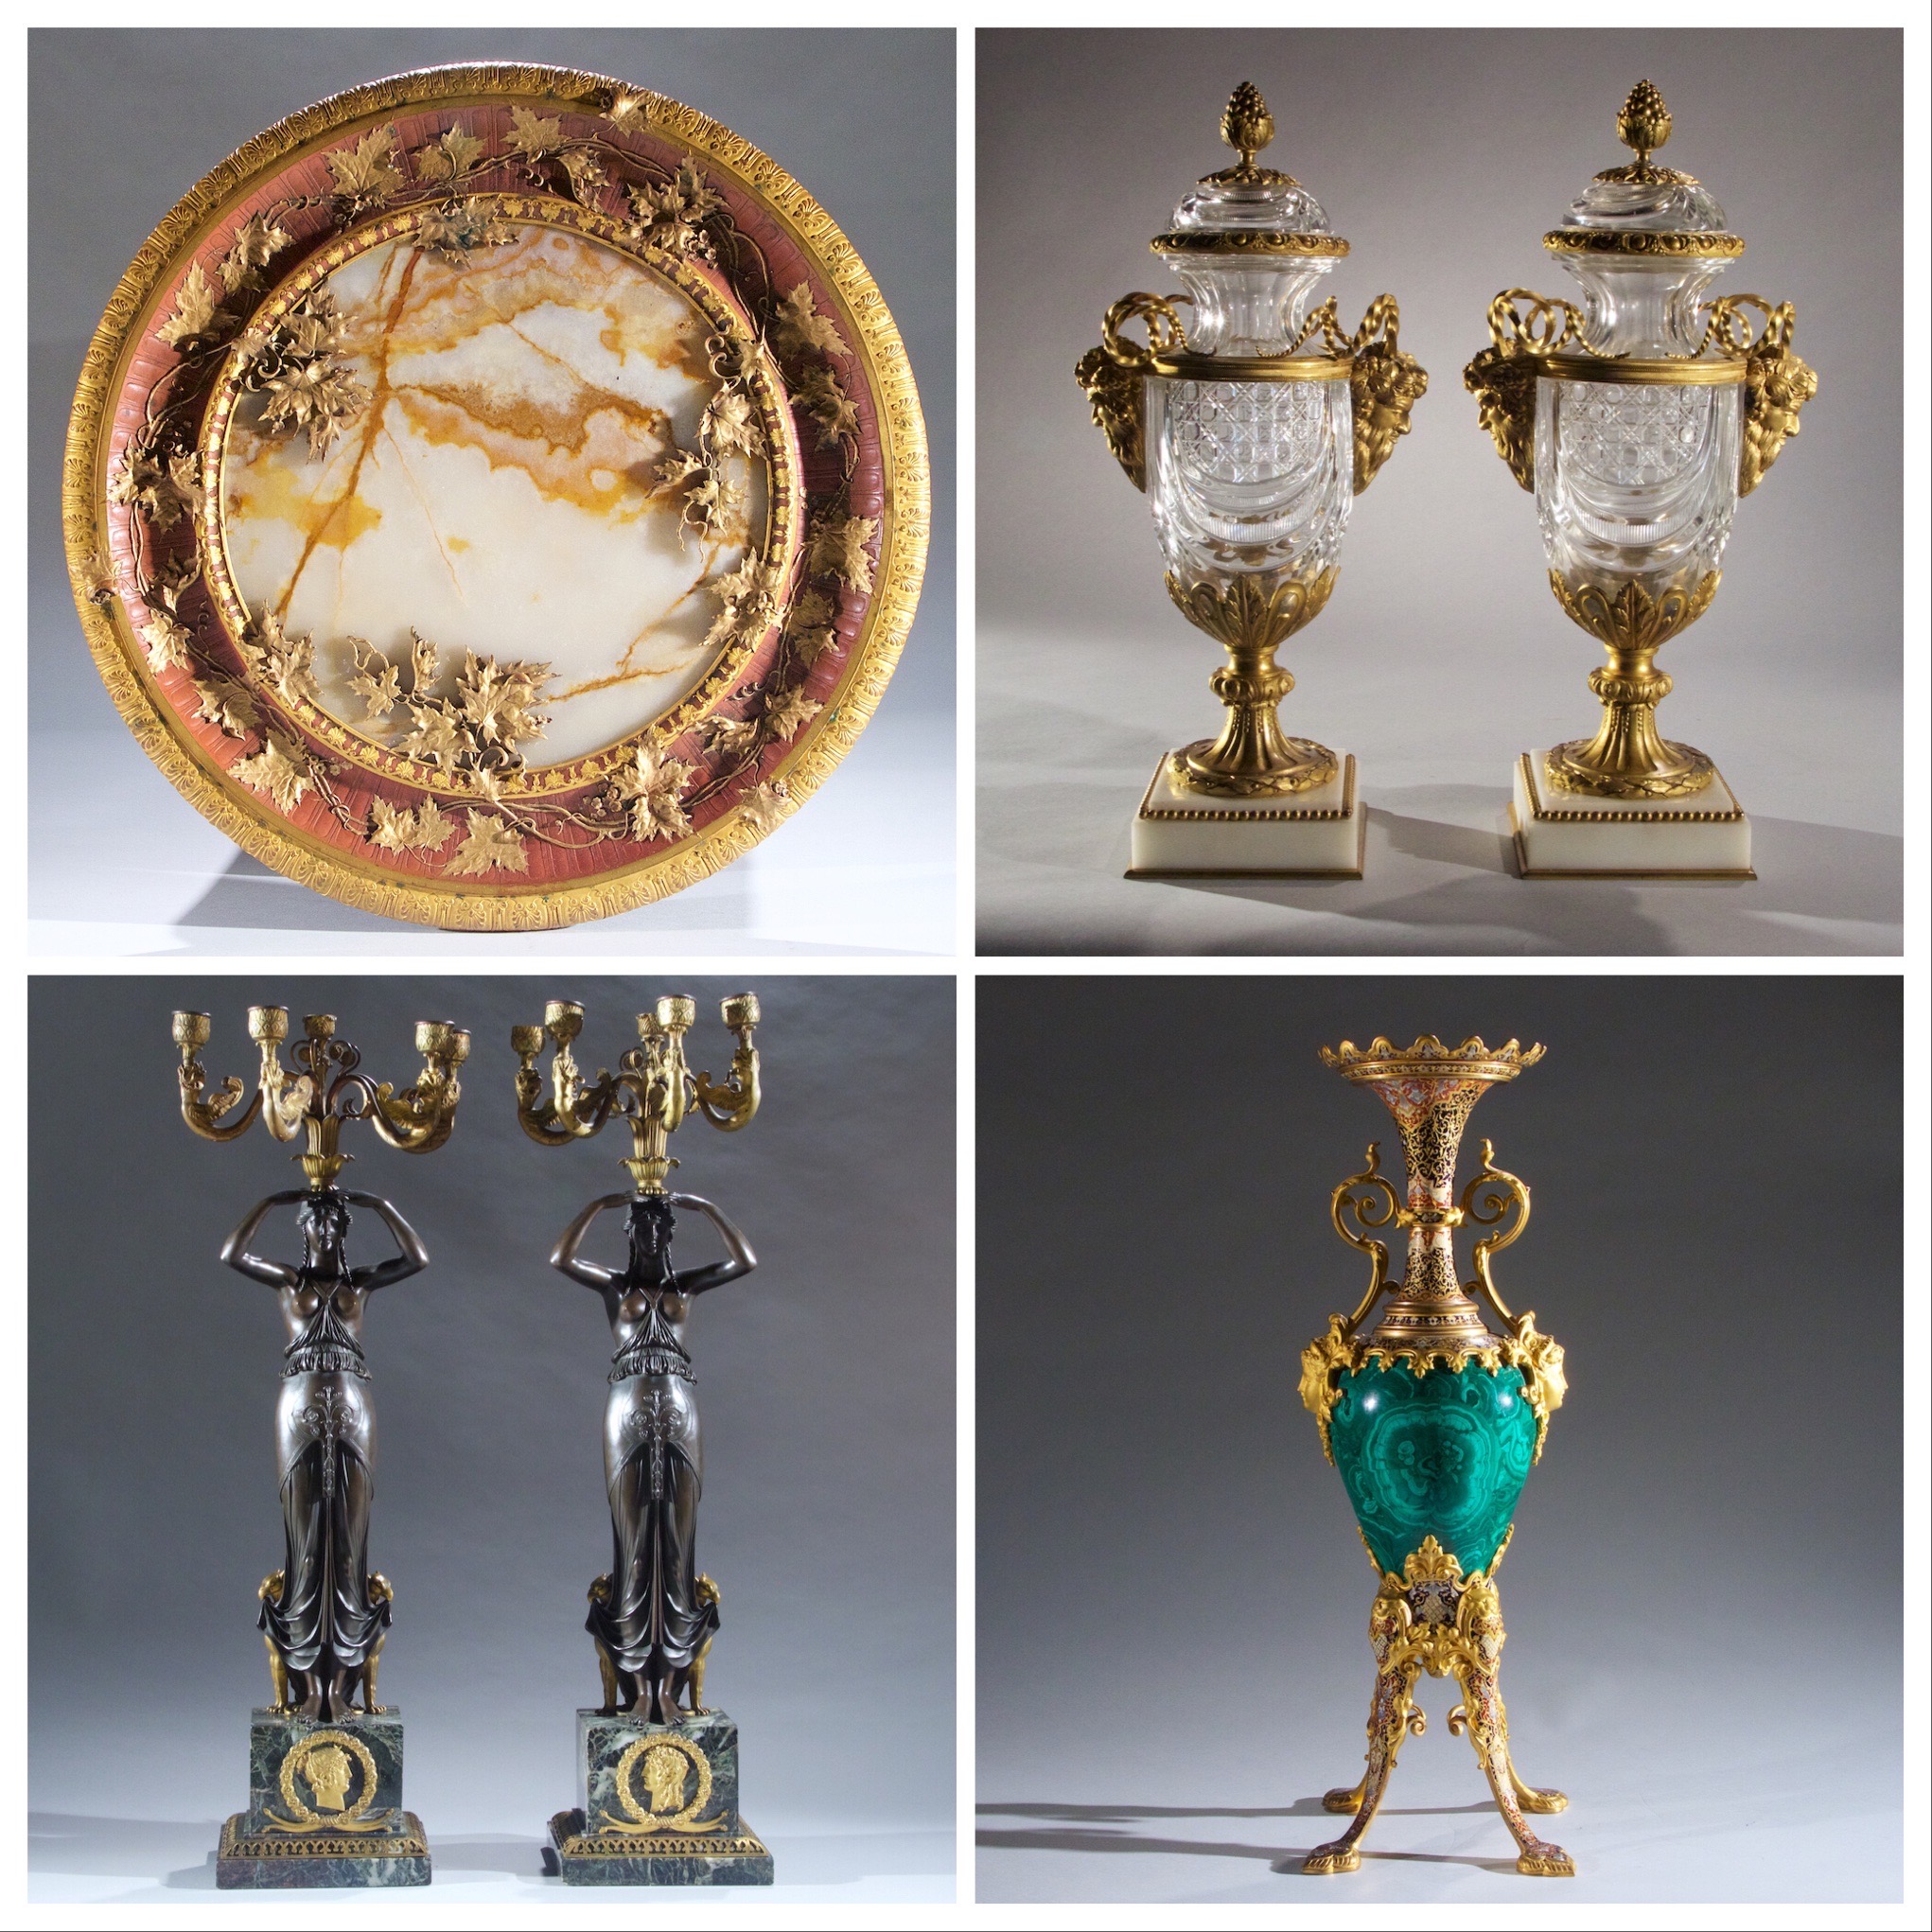 French Ormolu-mounted Polychrome Bronze and Onyx Gueridon by G. Servant, Exceptional Pair of Crystal and Bronze Mounted Vases, Magnificent Gilt-Bronze Champleve and Malachite Vase on Splayed Supports, Important and Rare Pair of Empire Figural Candelabra